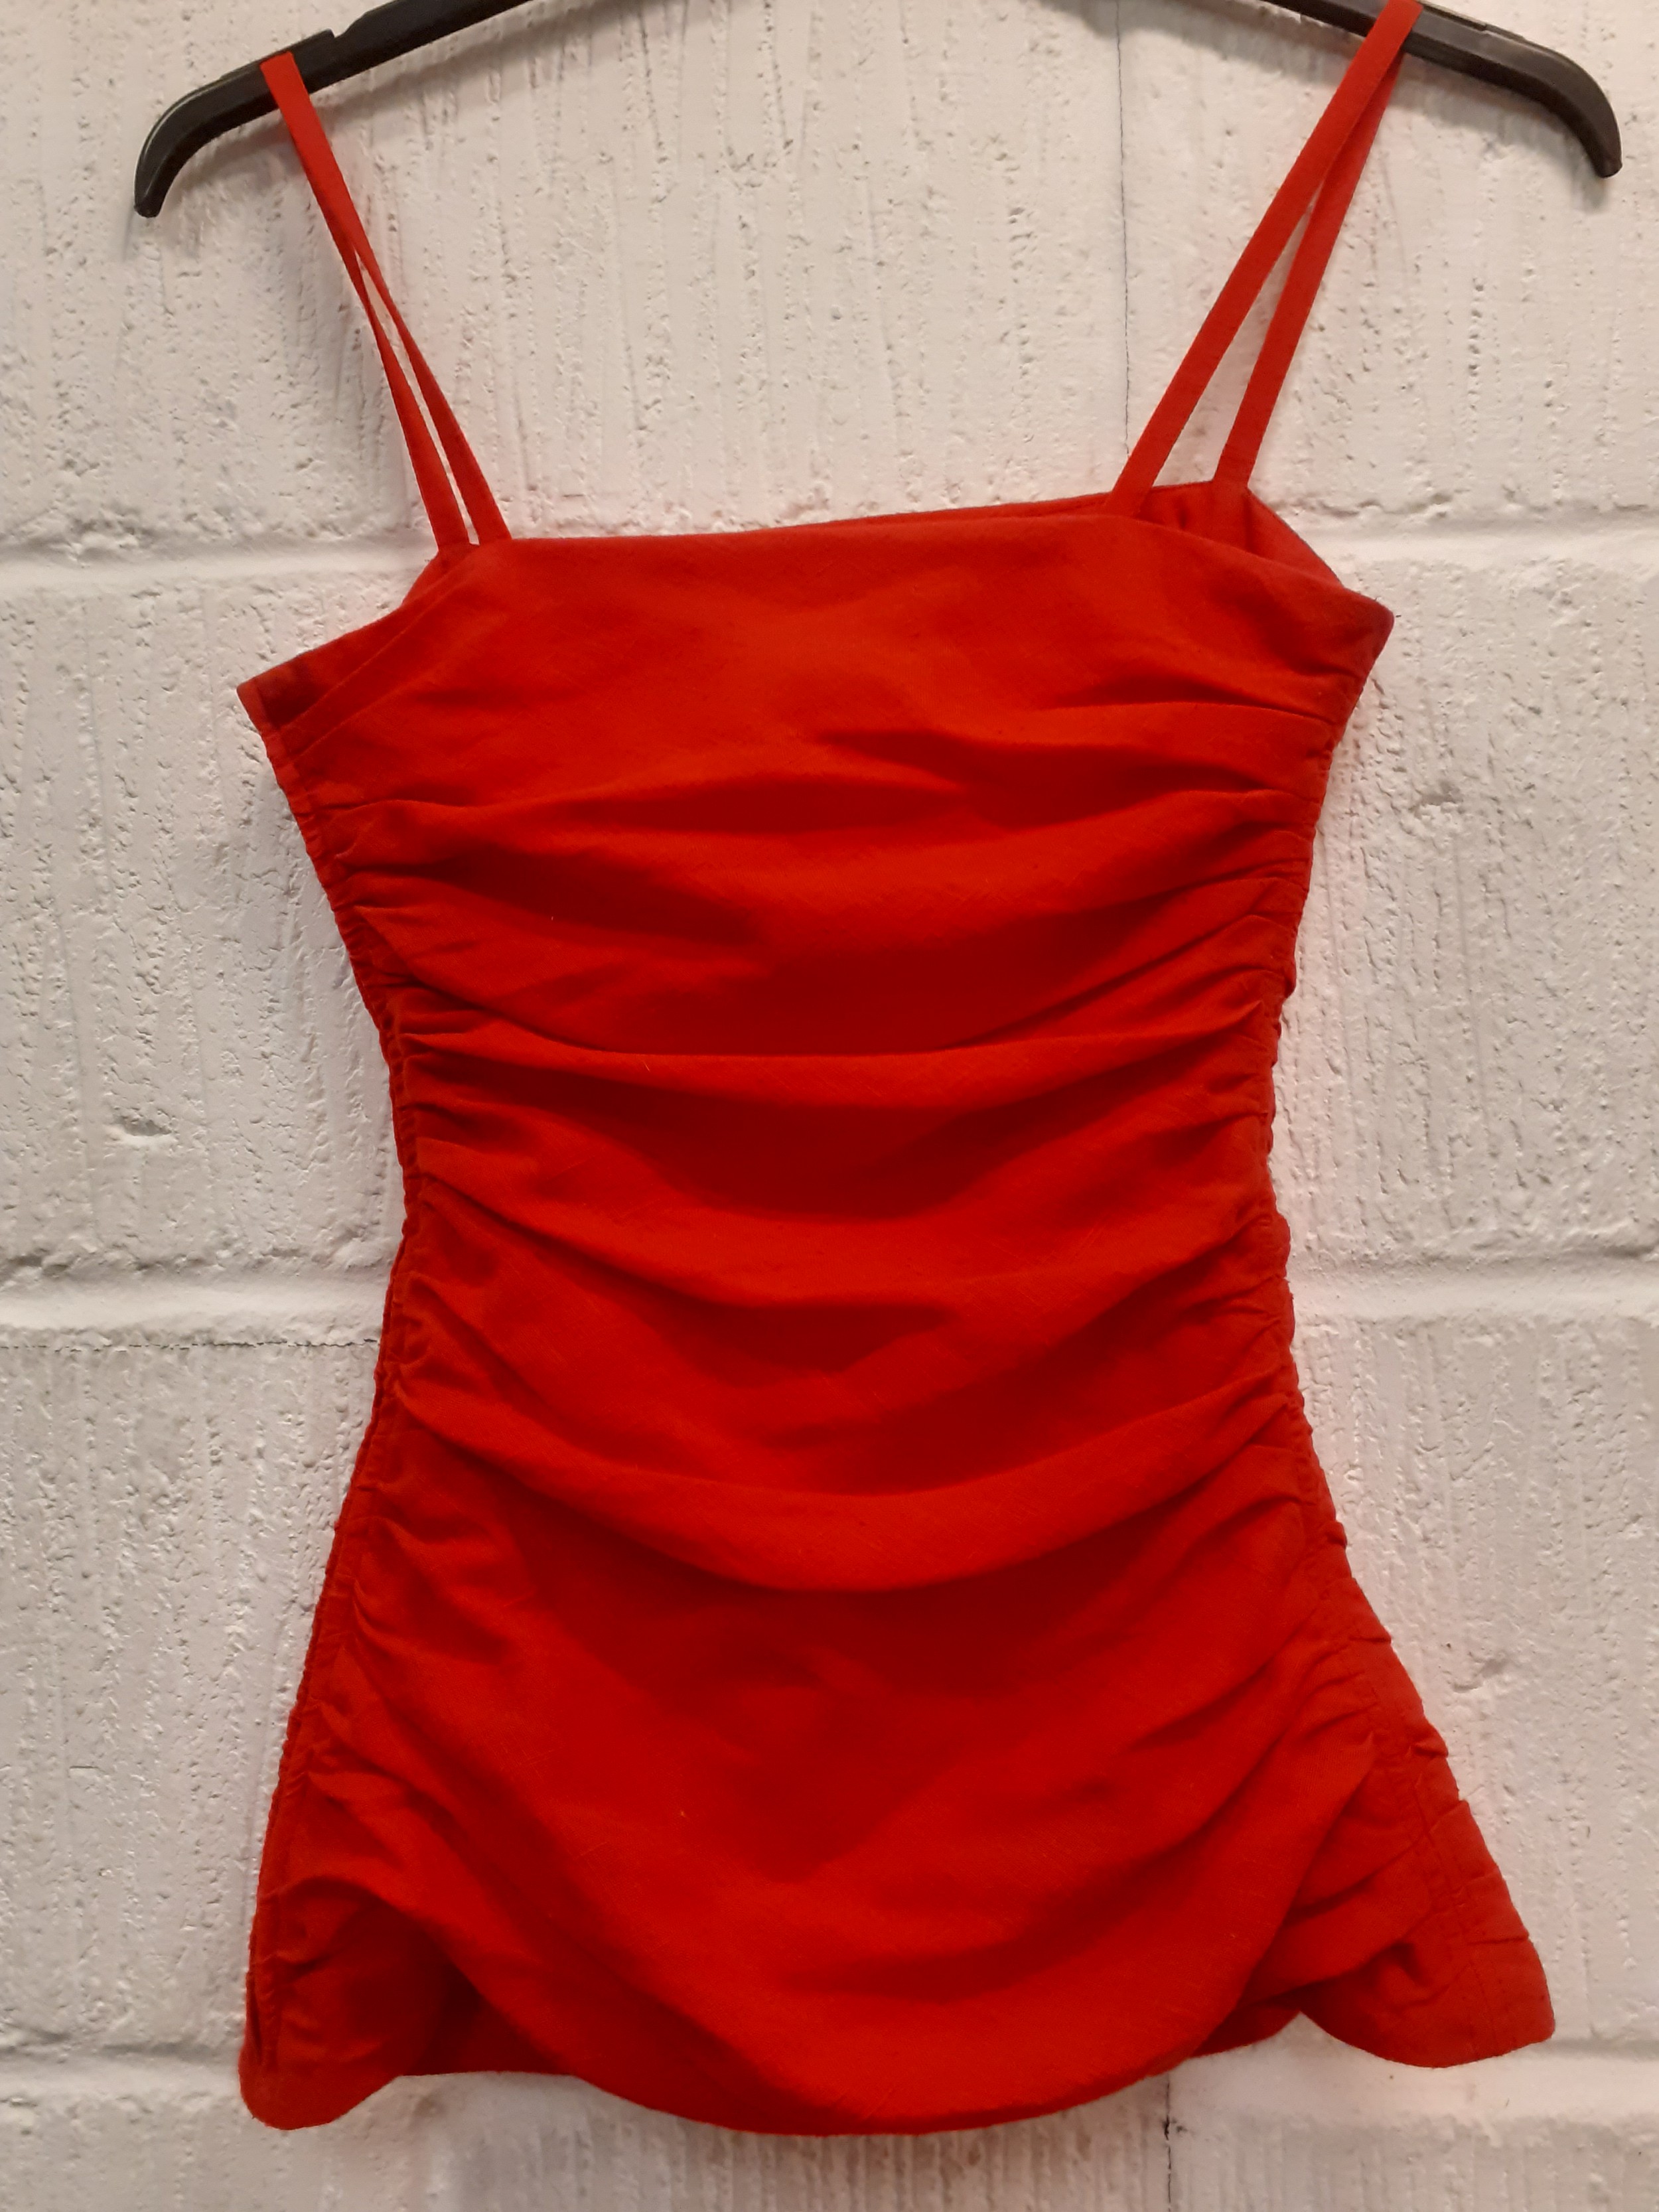 YSL-A Saint Laurent Rive Gauche red ruched top with shoulder straps and side zip, European size 36 - Image 13 of 18